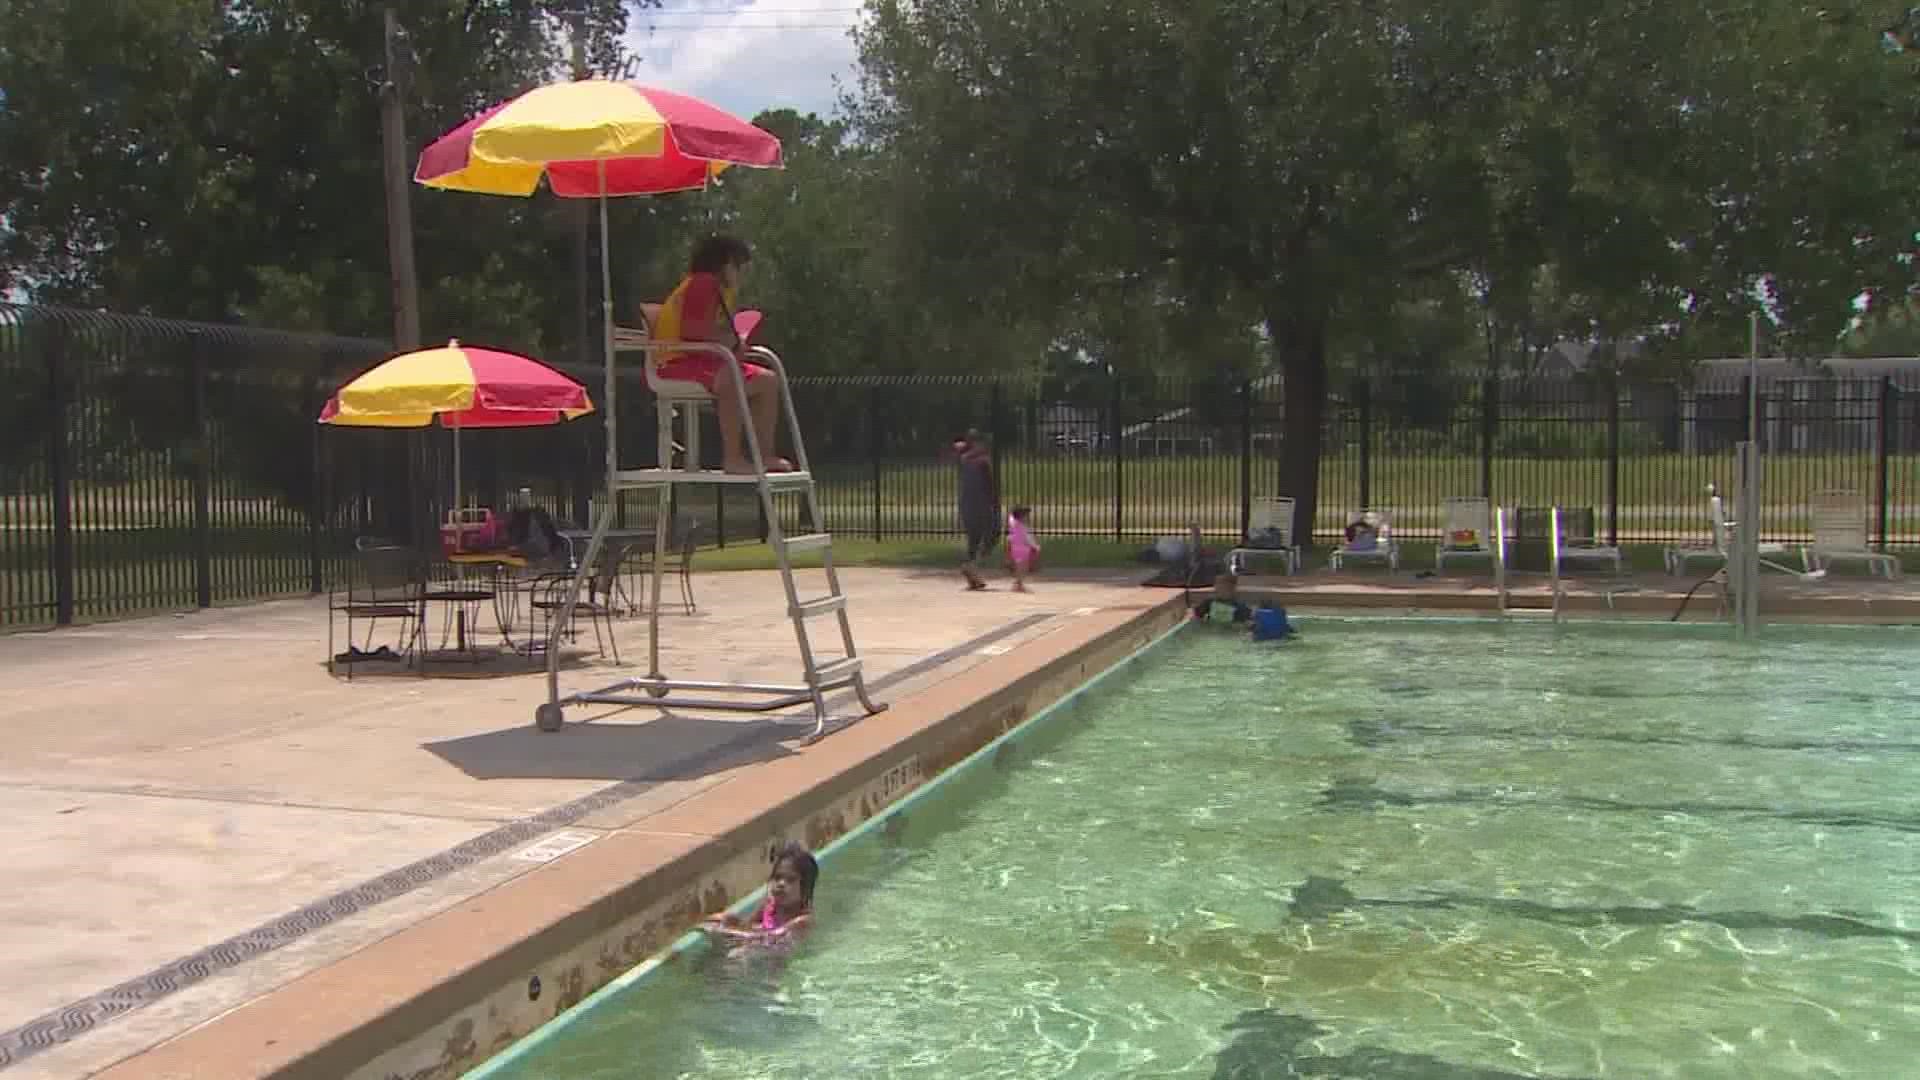 It's getting hot and that means it's pool season, but some of the city's pools remain closed due to a lack of lifeguards.